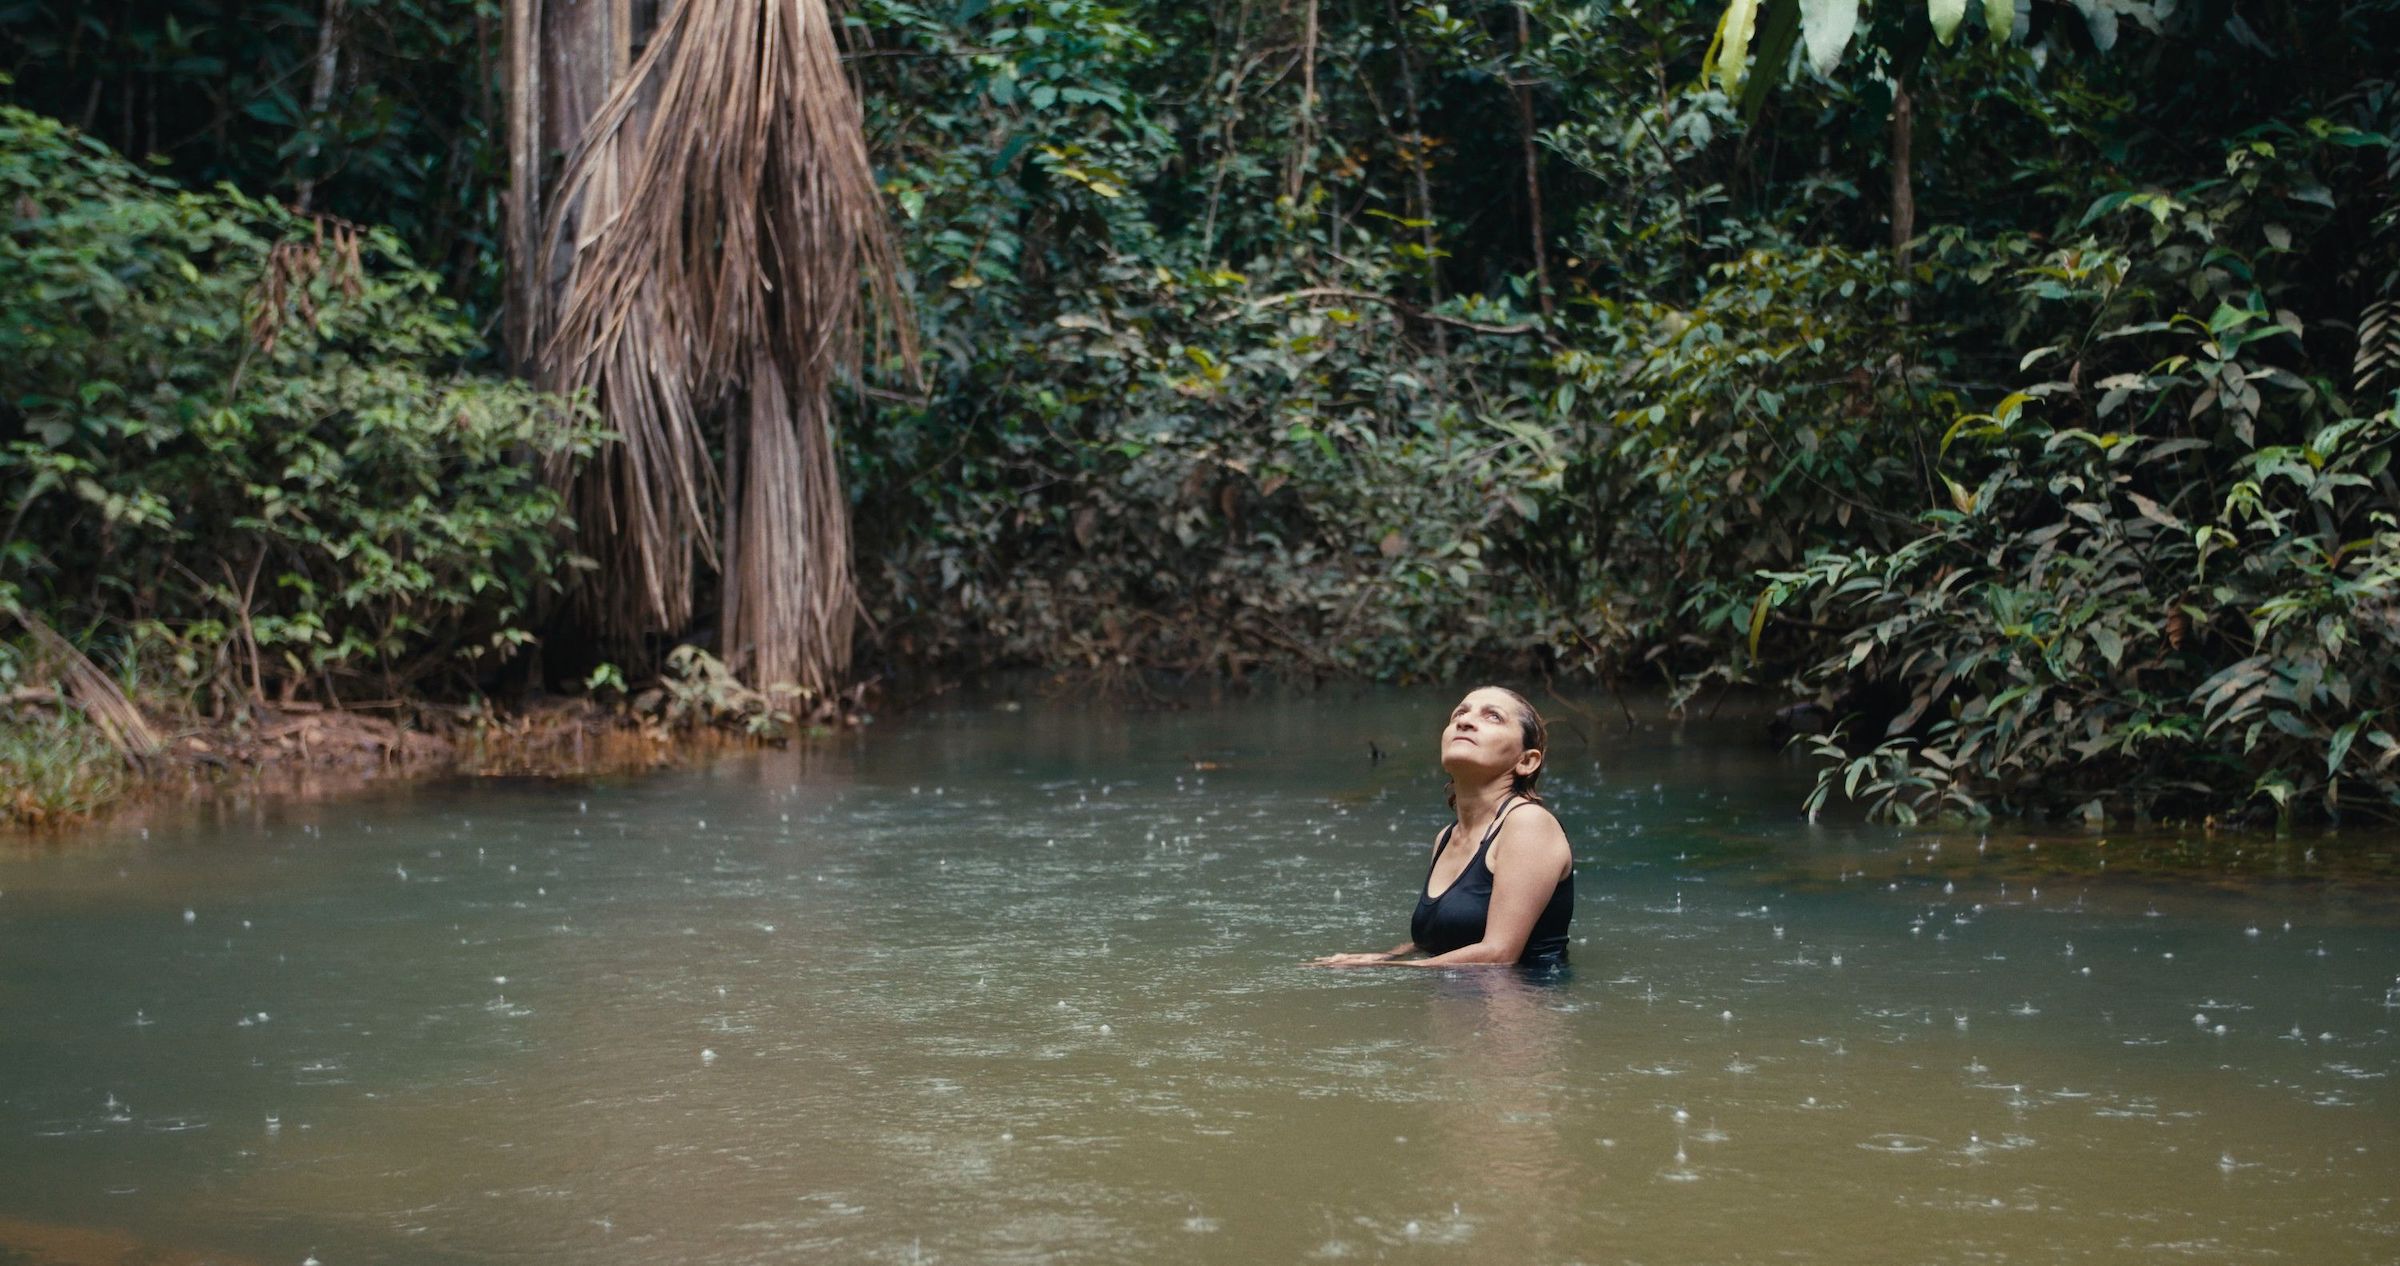 A woman in a black one piece swimsuit stands up to her waist in the river, looking upward